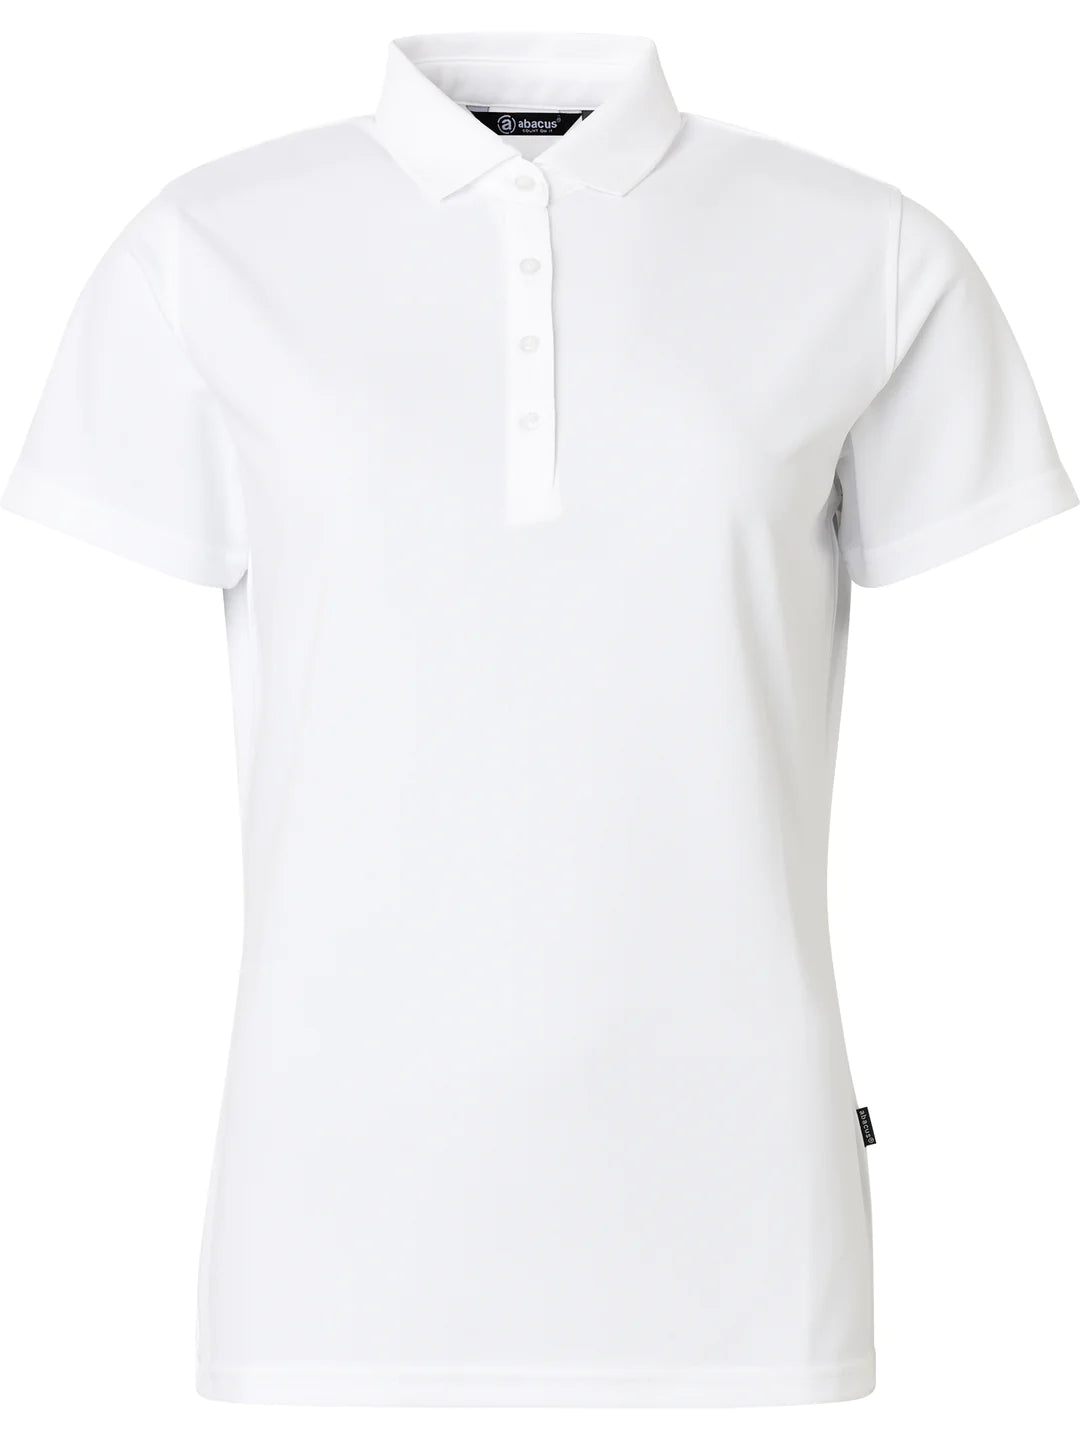 Abacus Sports Wear: Women’s Short Sleeve Golf Polo – Cray (Classic Colors)